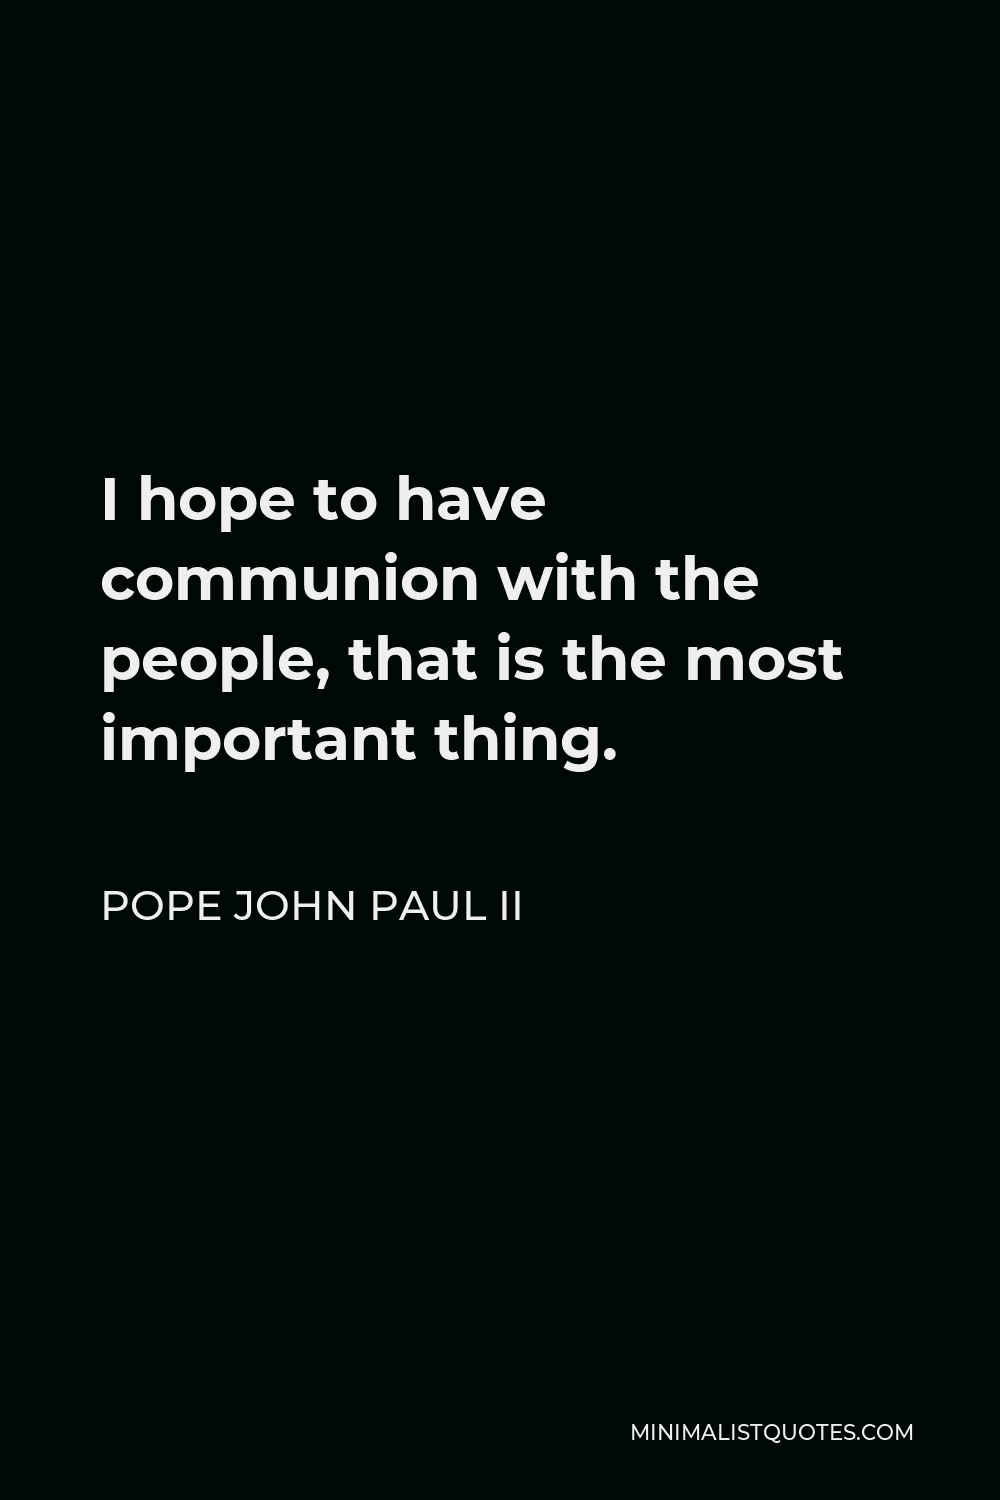 Pope John Paul II Quote - I hope to have communion with the people, that is the most important thing.